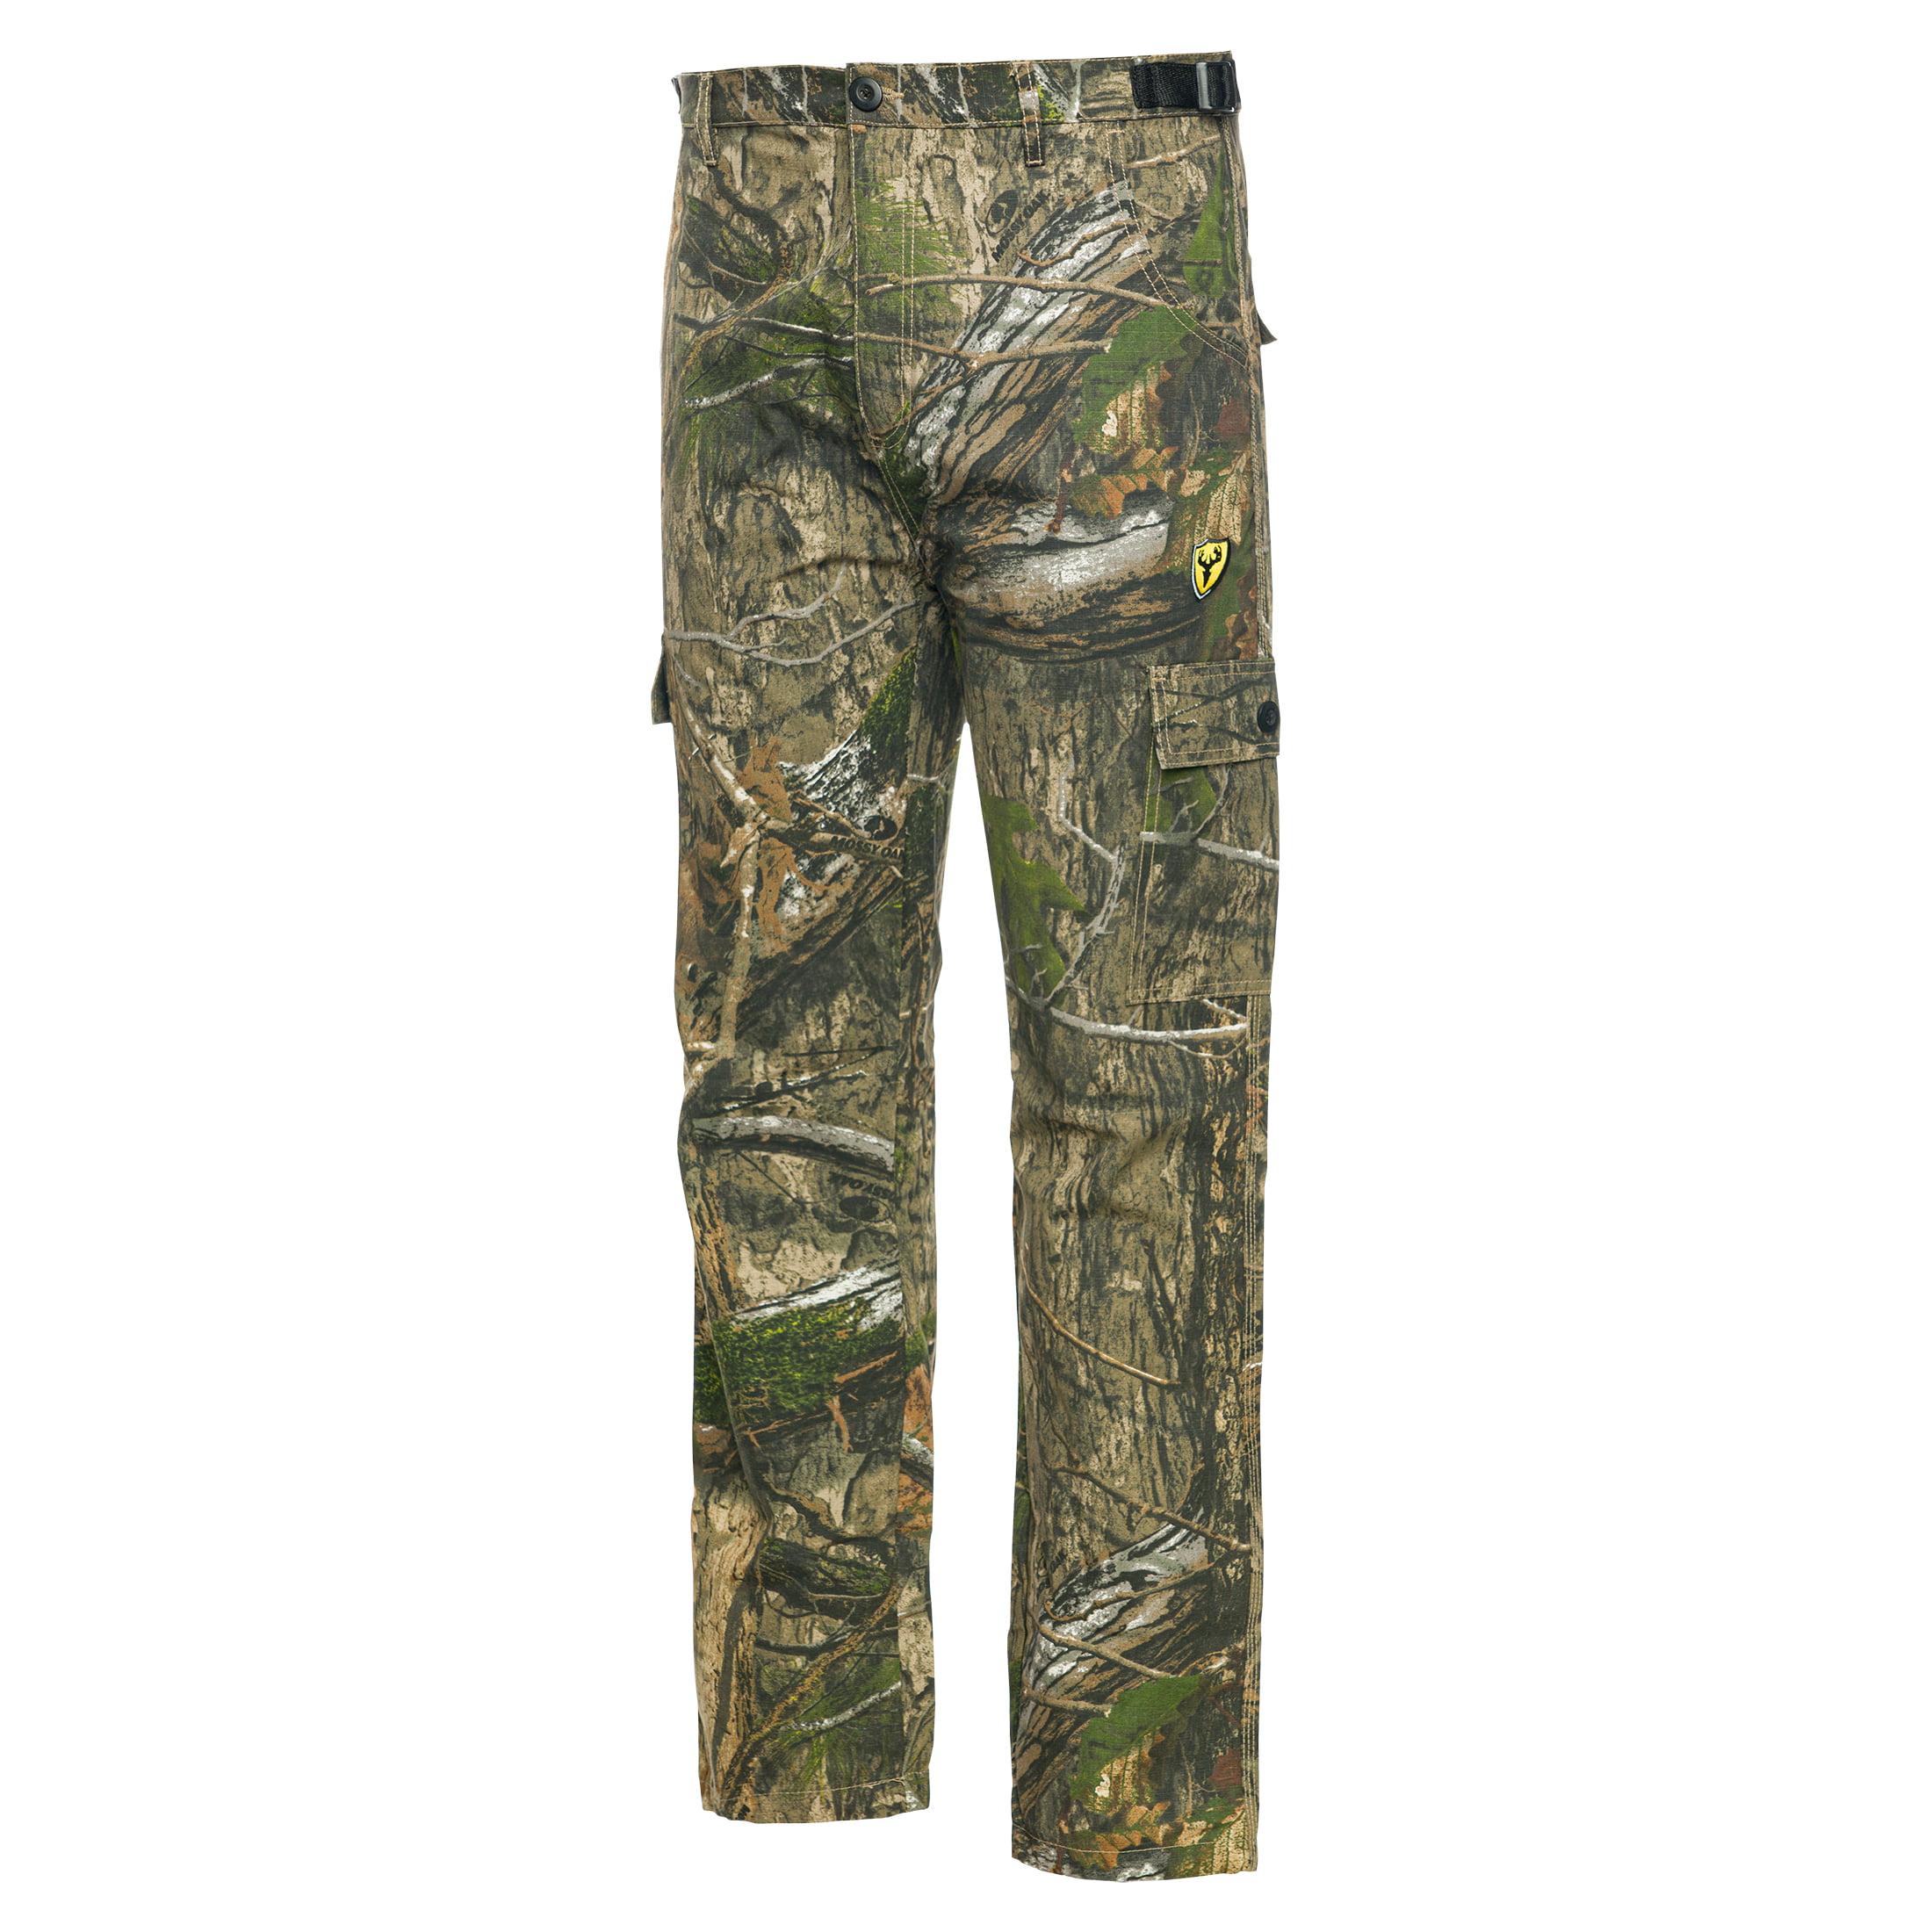 Scent Blocker Shield Series Fused Cotton Pants, Hunting Pants for Men  (Mossy Oak Country DNA, X-Large)